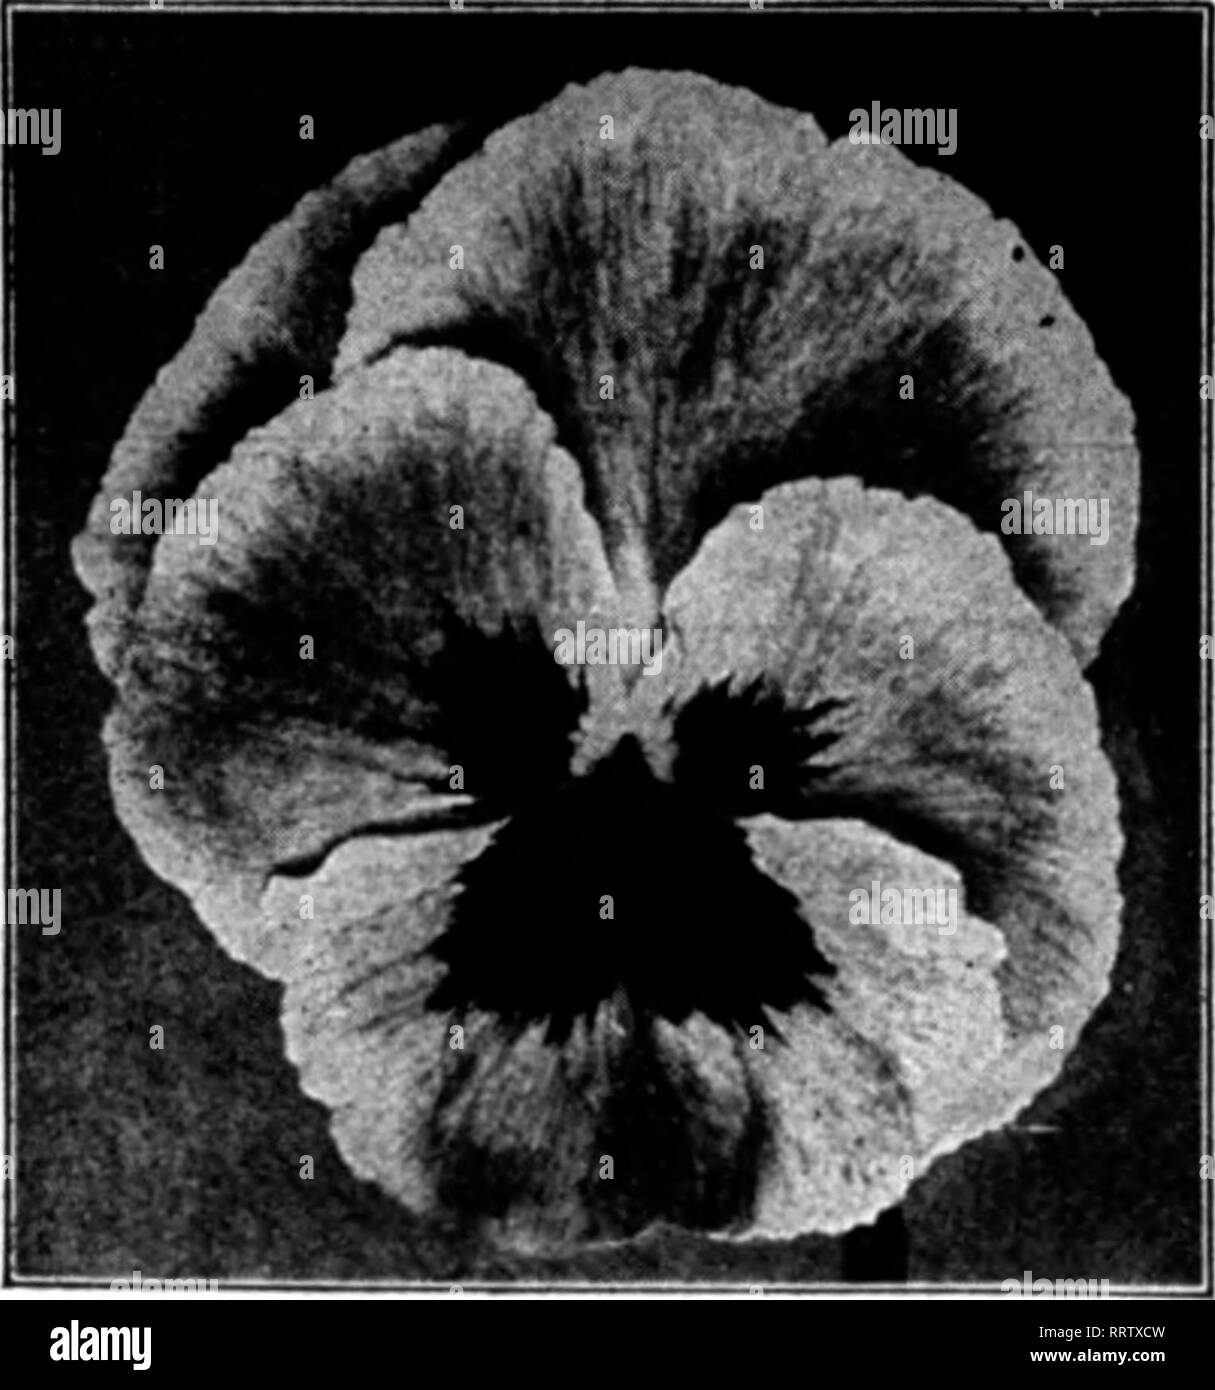 . Florists' review [microform]. Floriculture. Mention The Review when you write.. Stokes' Standard Mixed Pansy The finest strain of Giant Pansies it is possible to produce. Is a blend of all the finest varieties from France, England and Germany. Trade pkt. (2000 seeds), SOc; j4 iz., 7Sc; GIANTS Tr. pkt. Oz. Bnsrnot'B Blotched S0.60 &gt;1.00 CaHsier (ilaiits 40 3.60 (iiailt Trimardeau 30 125 Orchid-tlowerert.'very IlKtat M 4.00 KiiKlif*h Larse-flowerlns 26 1.00 Fine Mixed IS .80 Ulant Adonis 35 2.00 Giant Lord BeaconRfleld 3S 2 00 Giant Emperor &gt;% 11 liam 35 2.00 1 n., $5.00; ^ lb., $18.00 ' Stock Photo